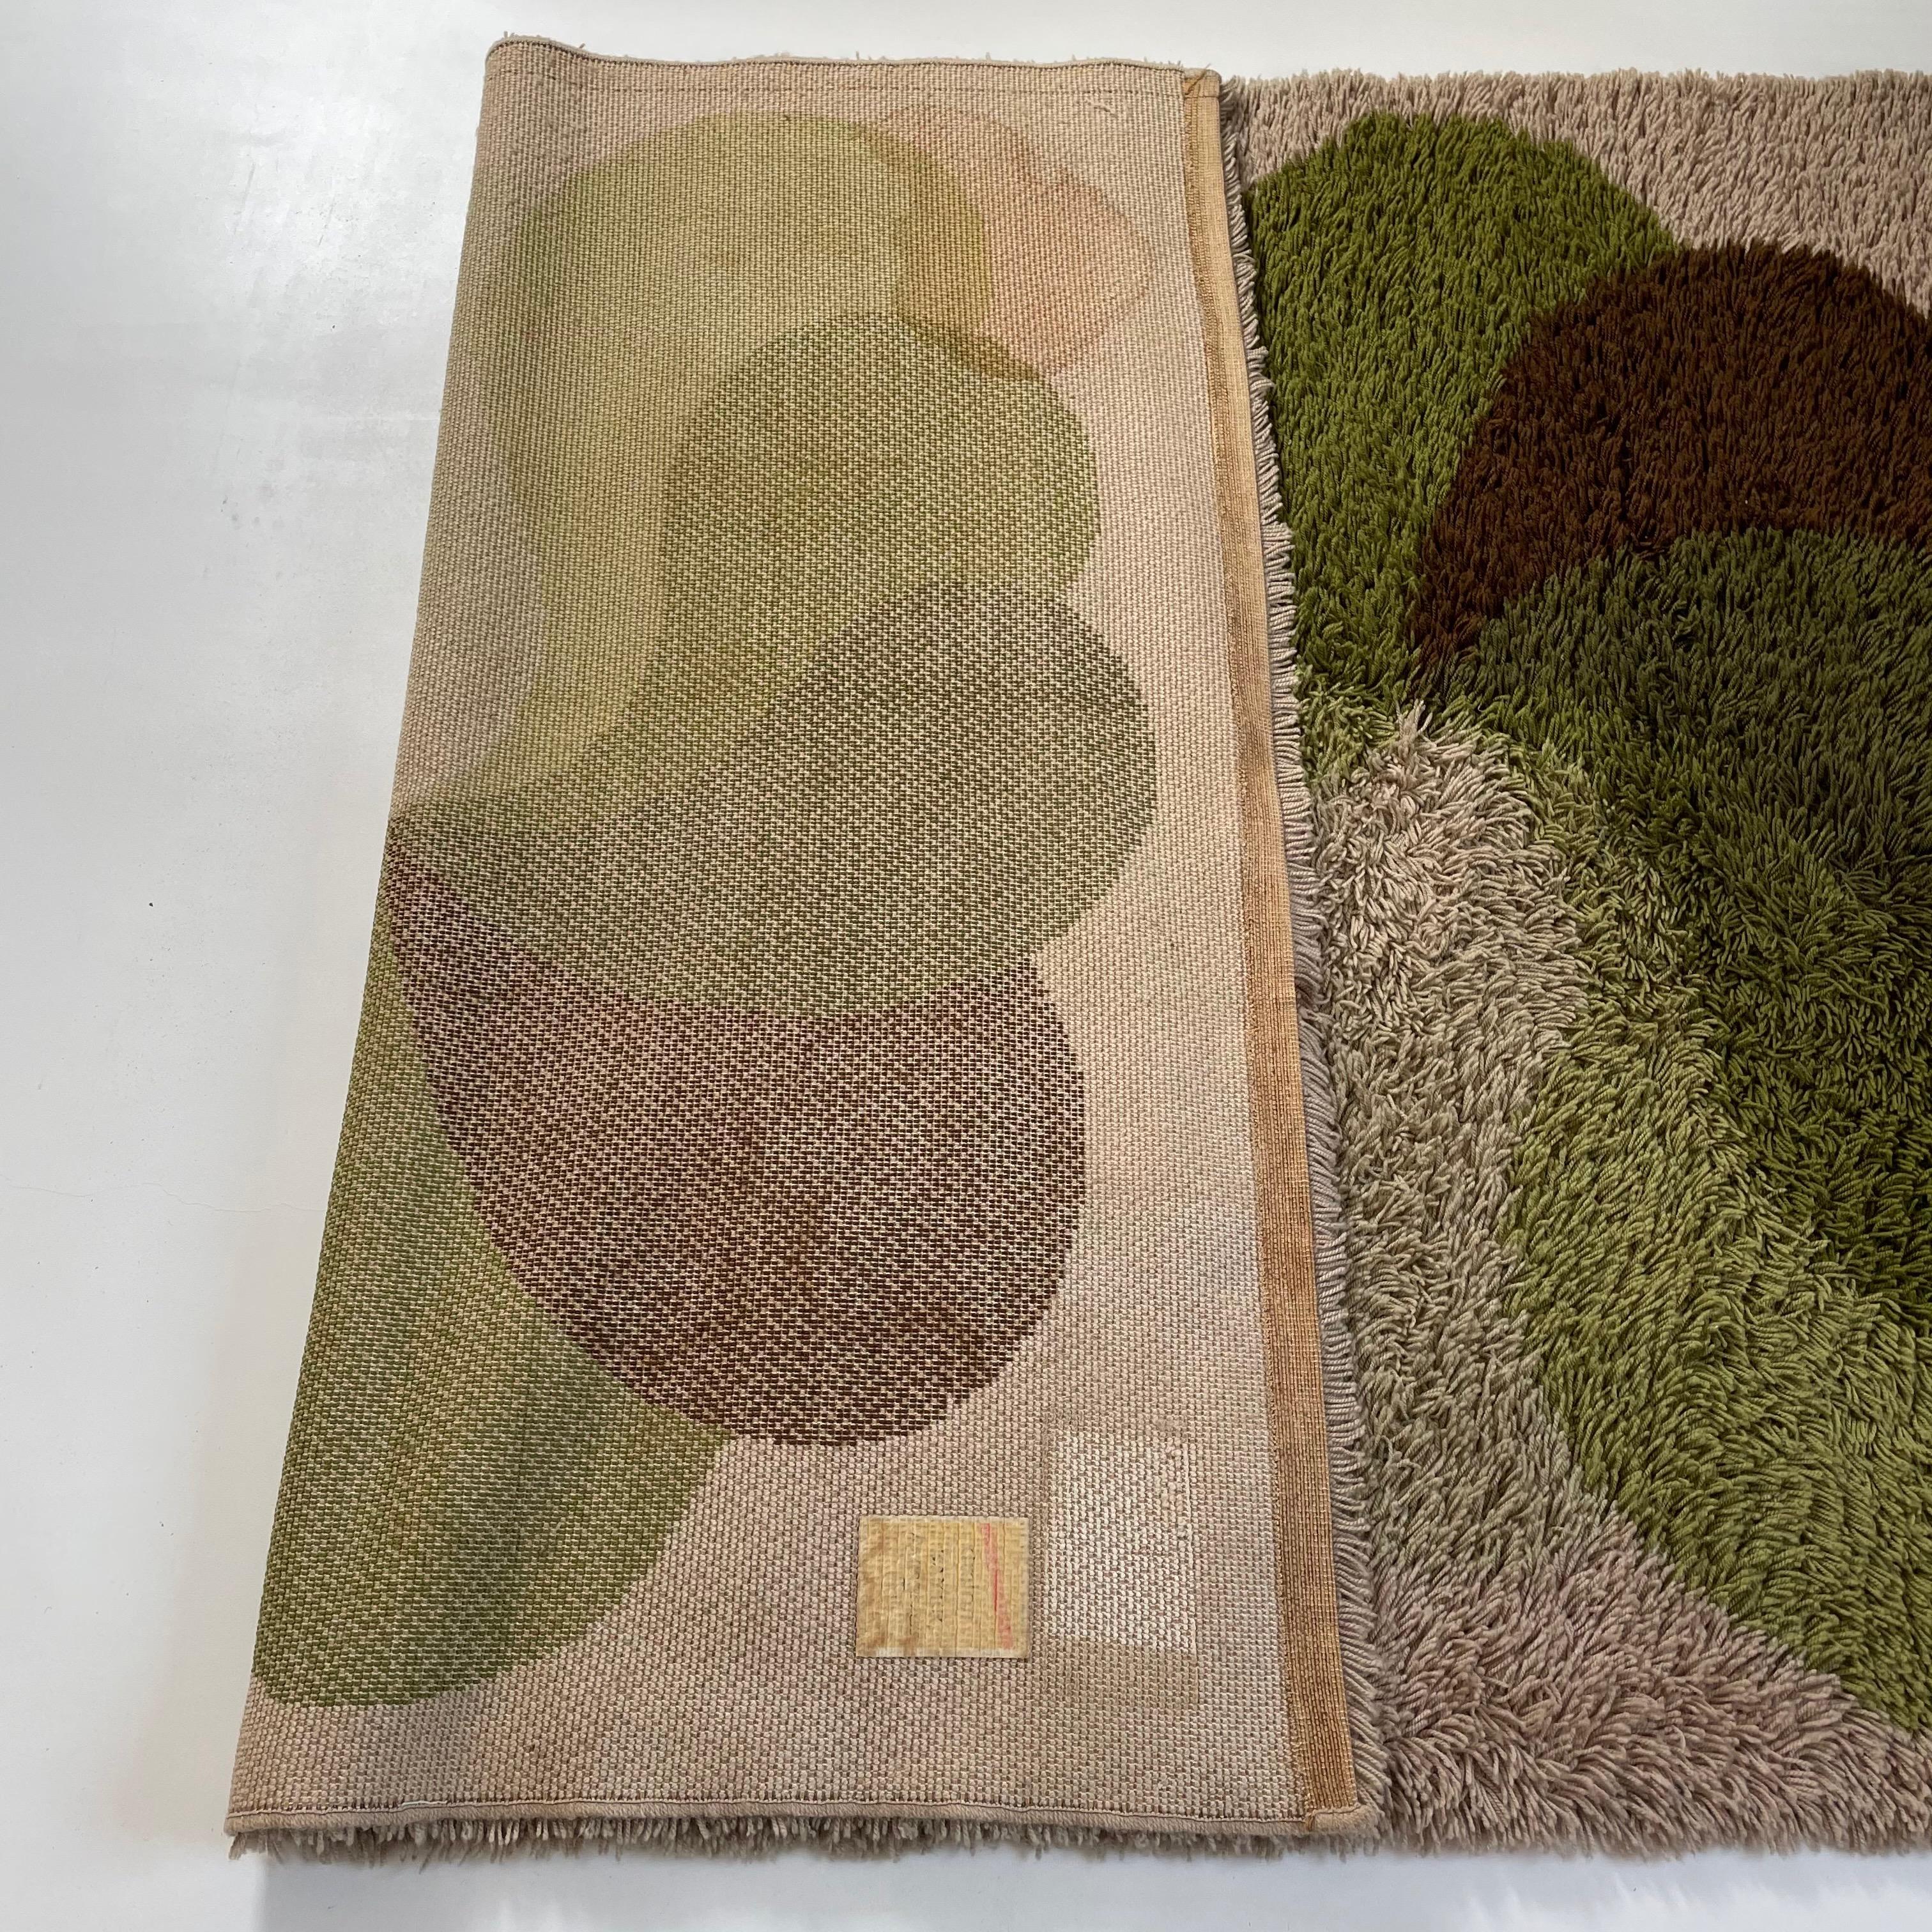 Large Panton Style Multi-Color High Pile Rya Rug by Desso Netherlands, 1970s For Sale 10